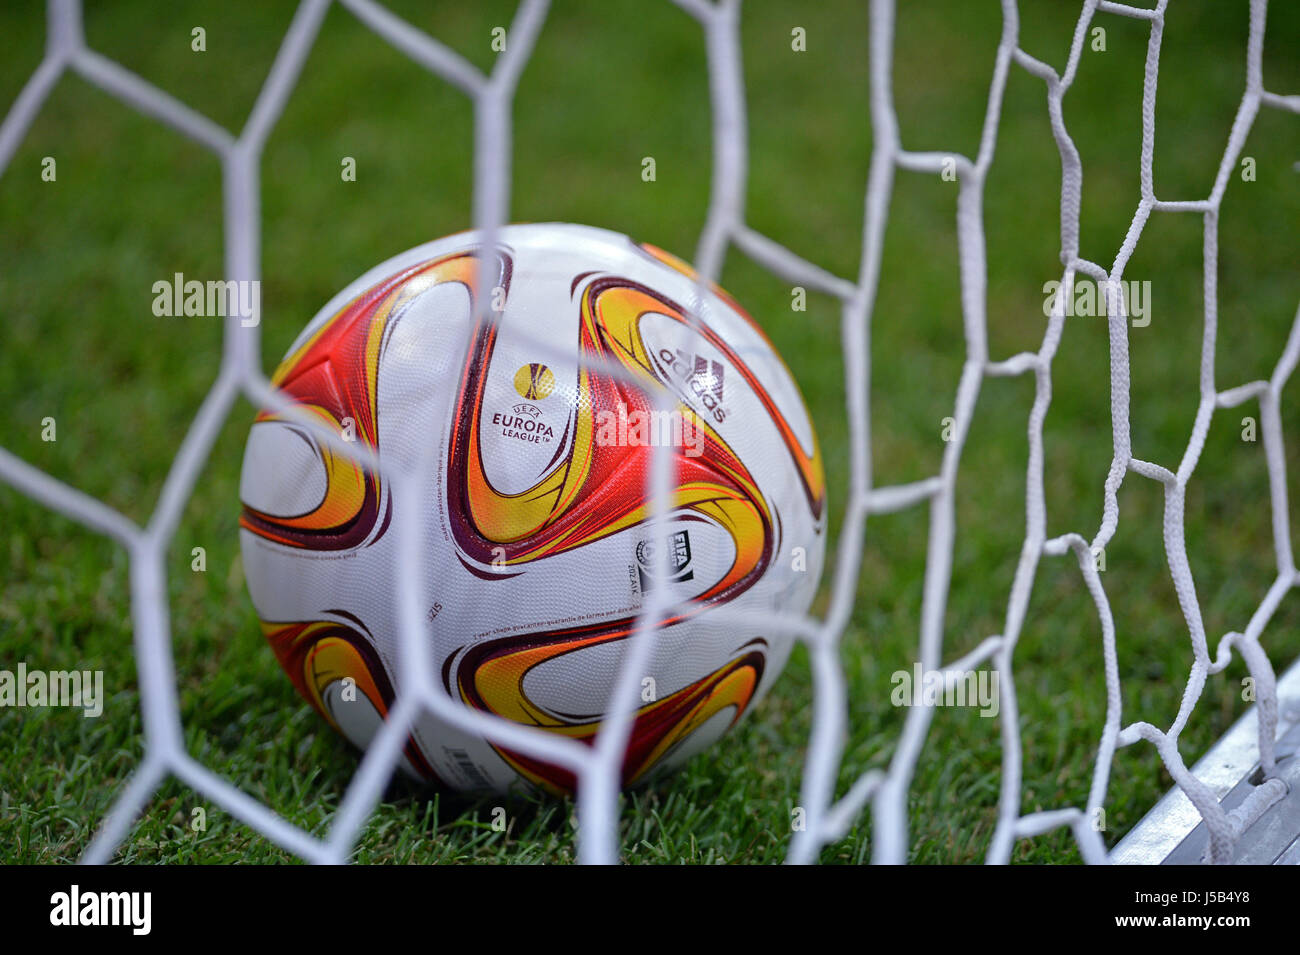 WARSAW, POLAND - MAY 27, 2015: Official UEFA Europa League match ball in the net during Training session before UEFA Europa League Final game Dnipro v Stock Photo